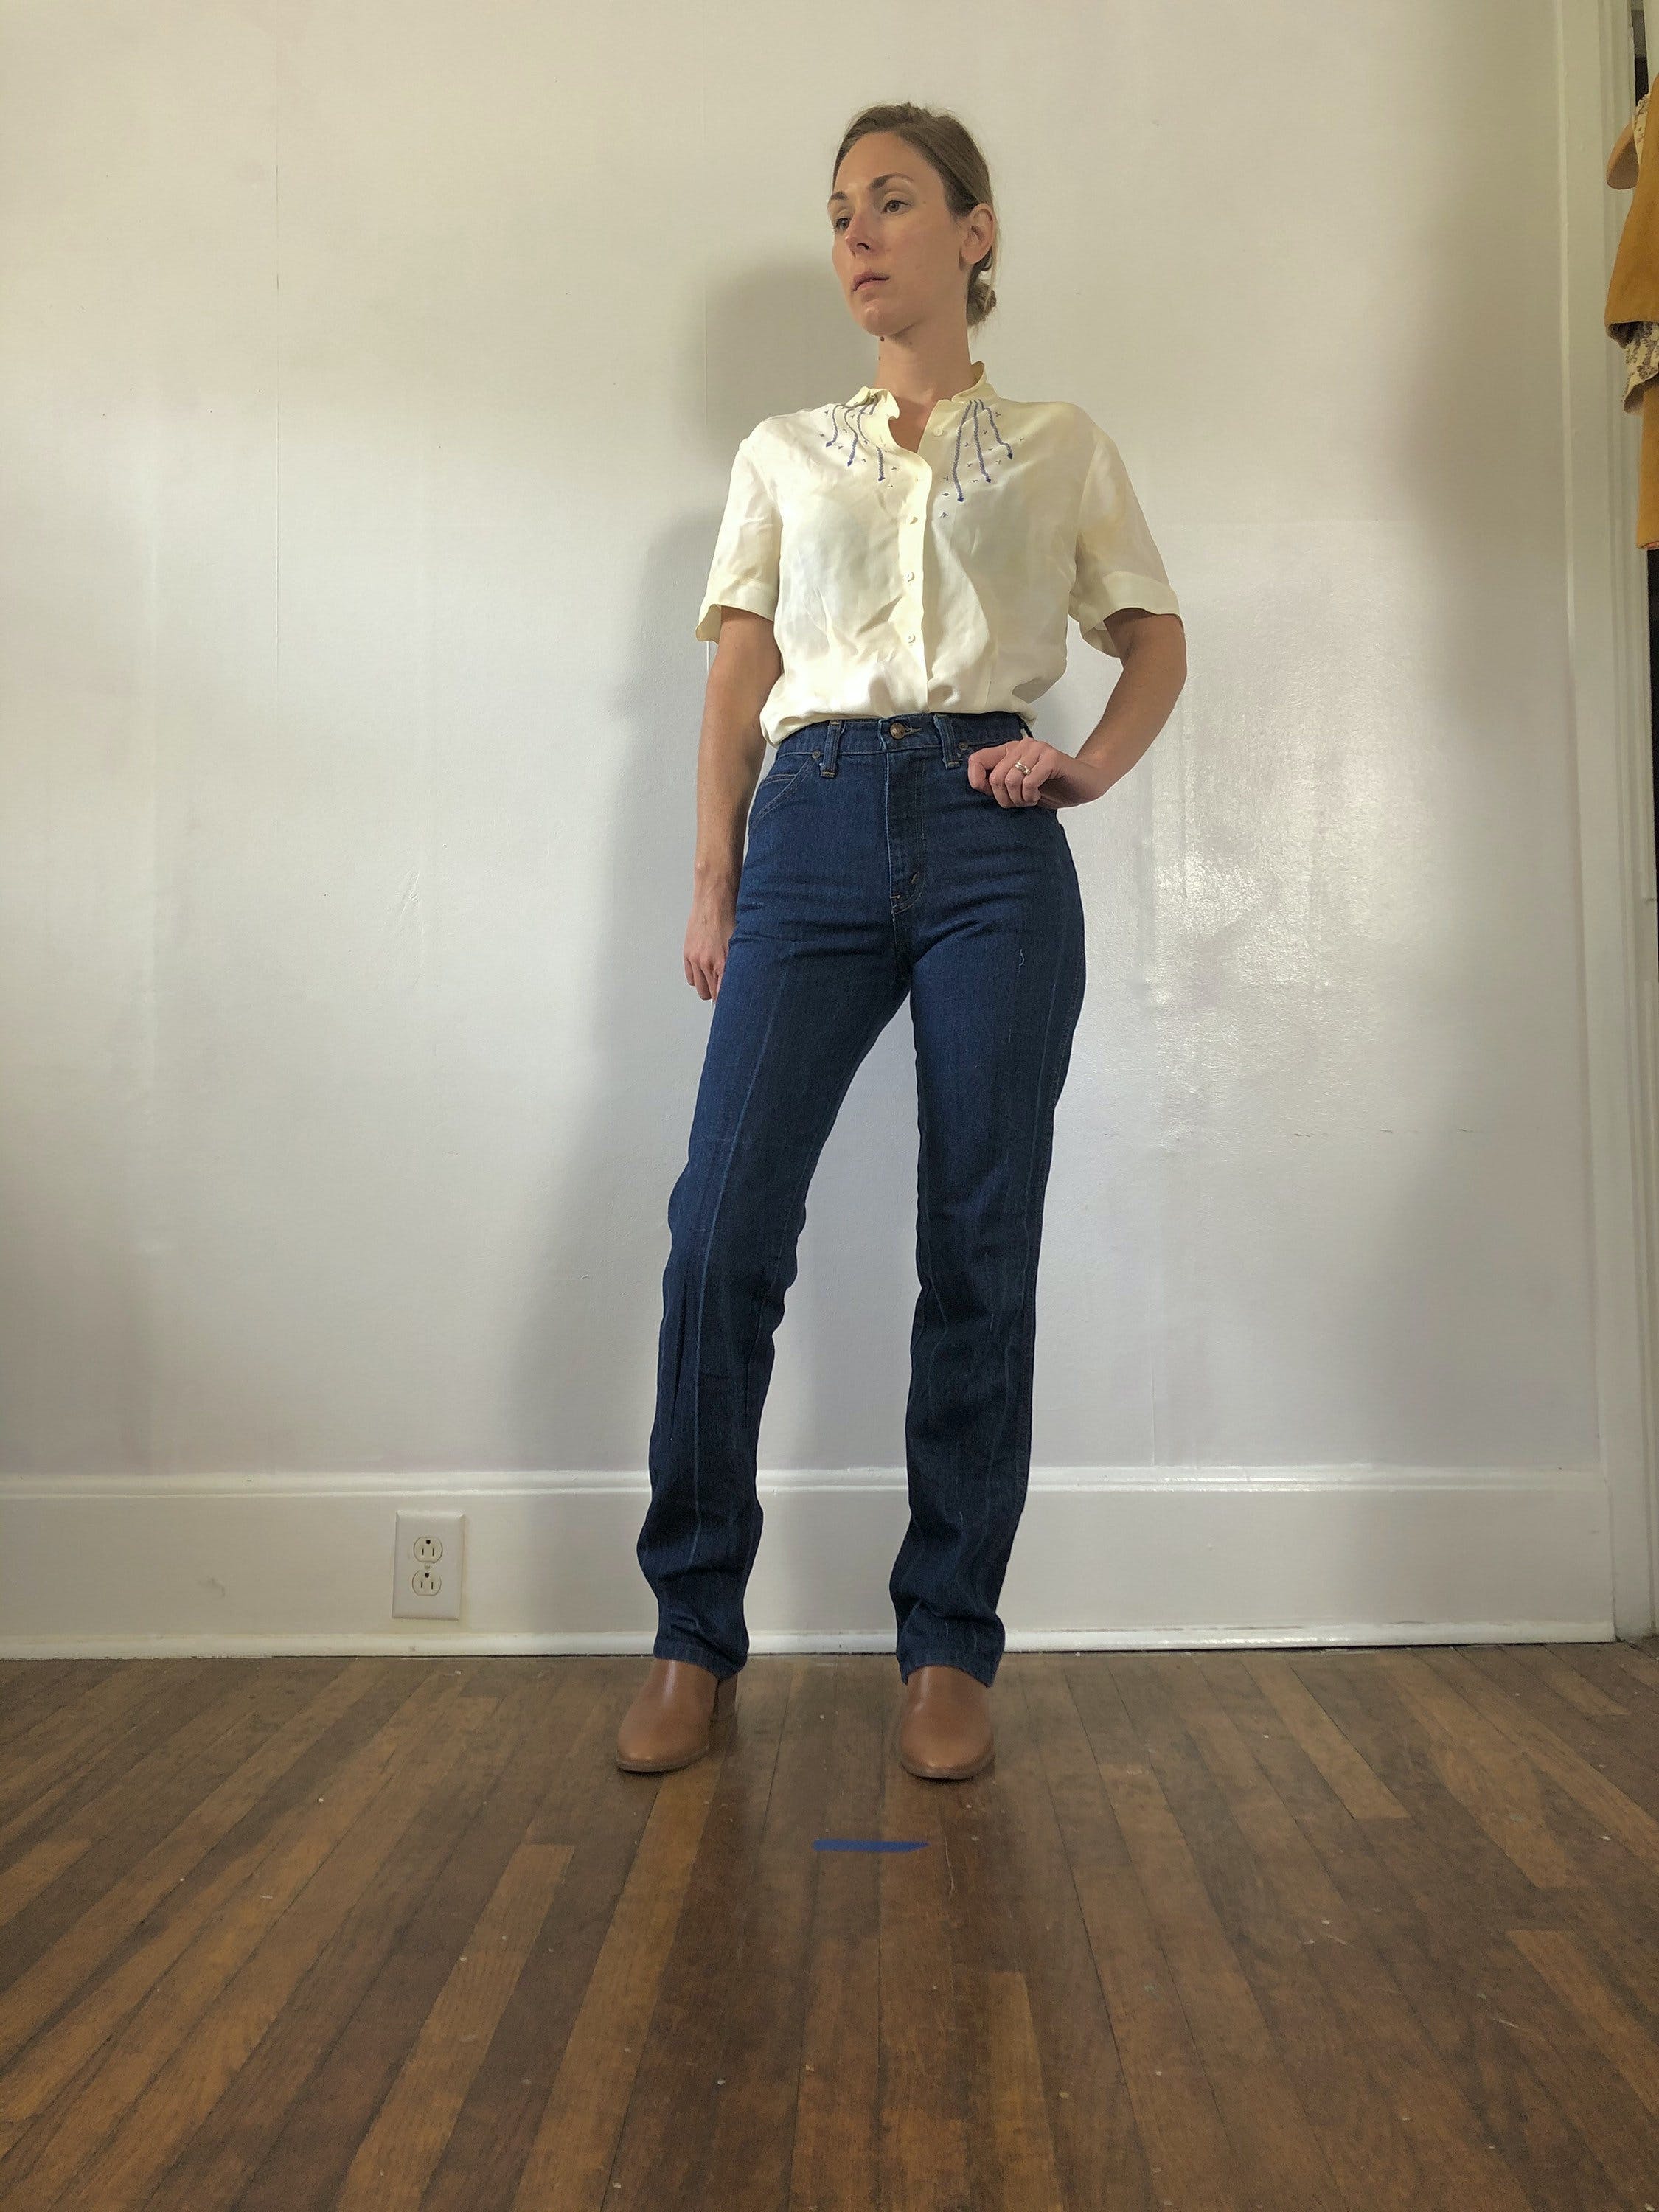 Vintage 80’s Cowboy Fit High Waisted Jeans by Dee Cee Brand | Shop ...